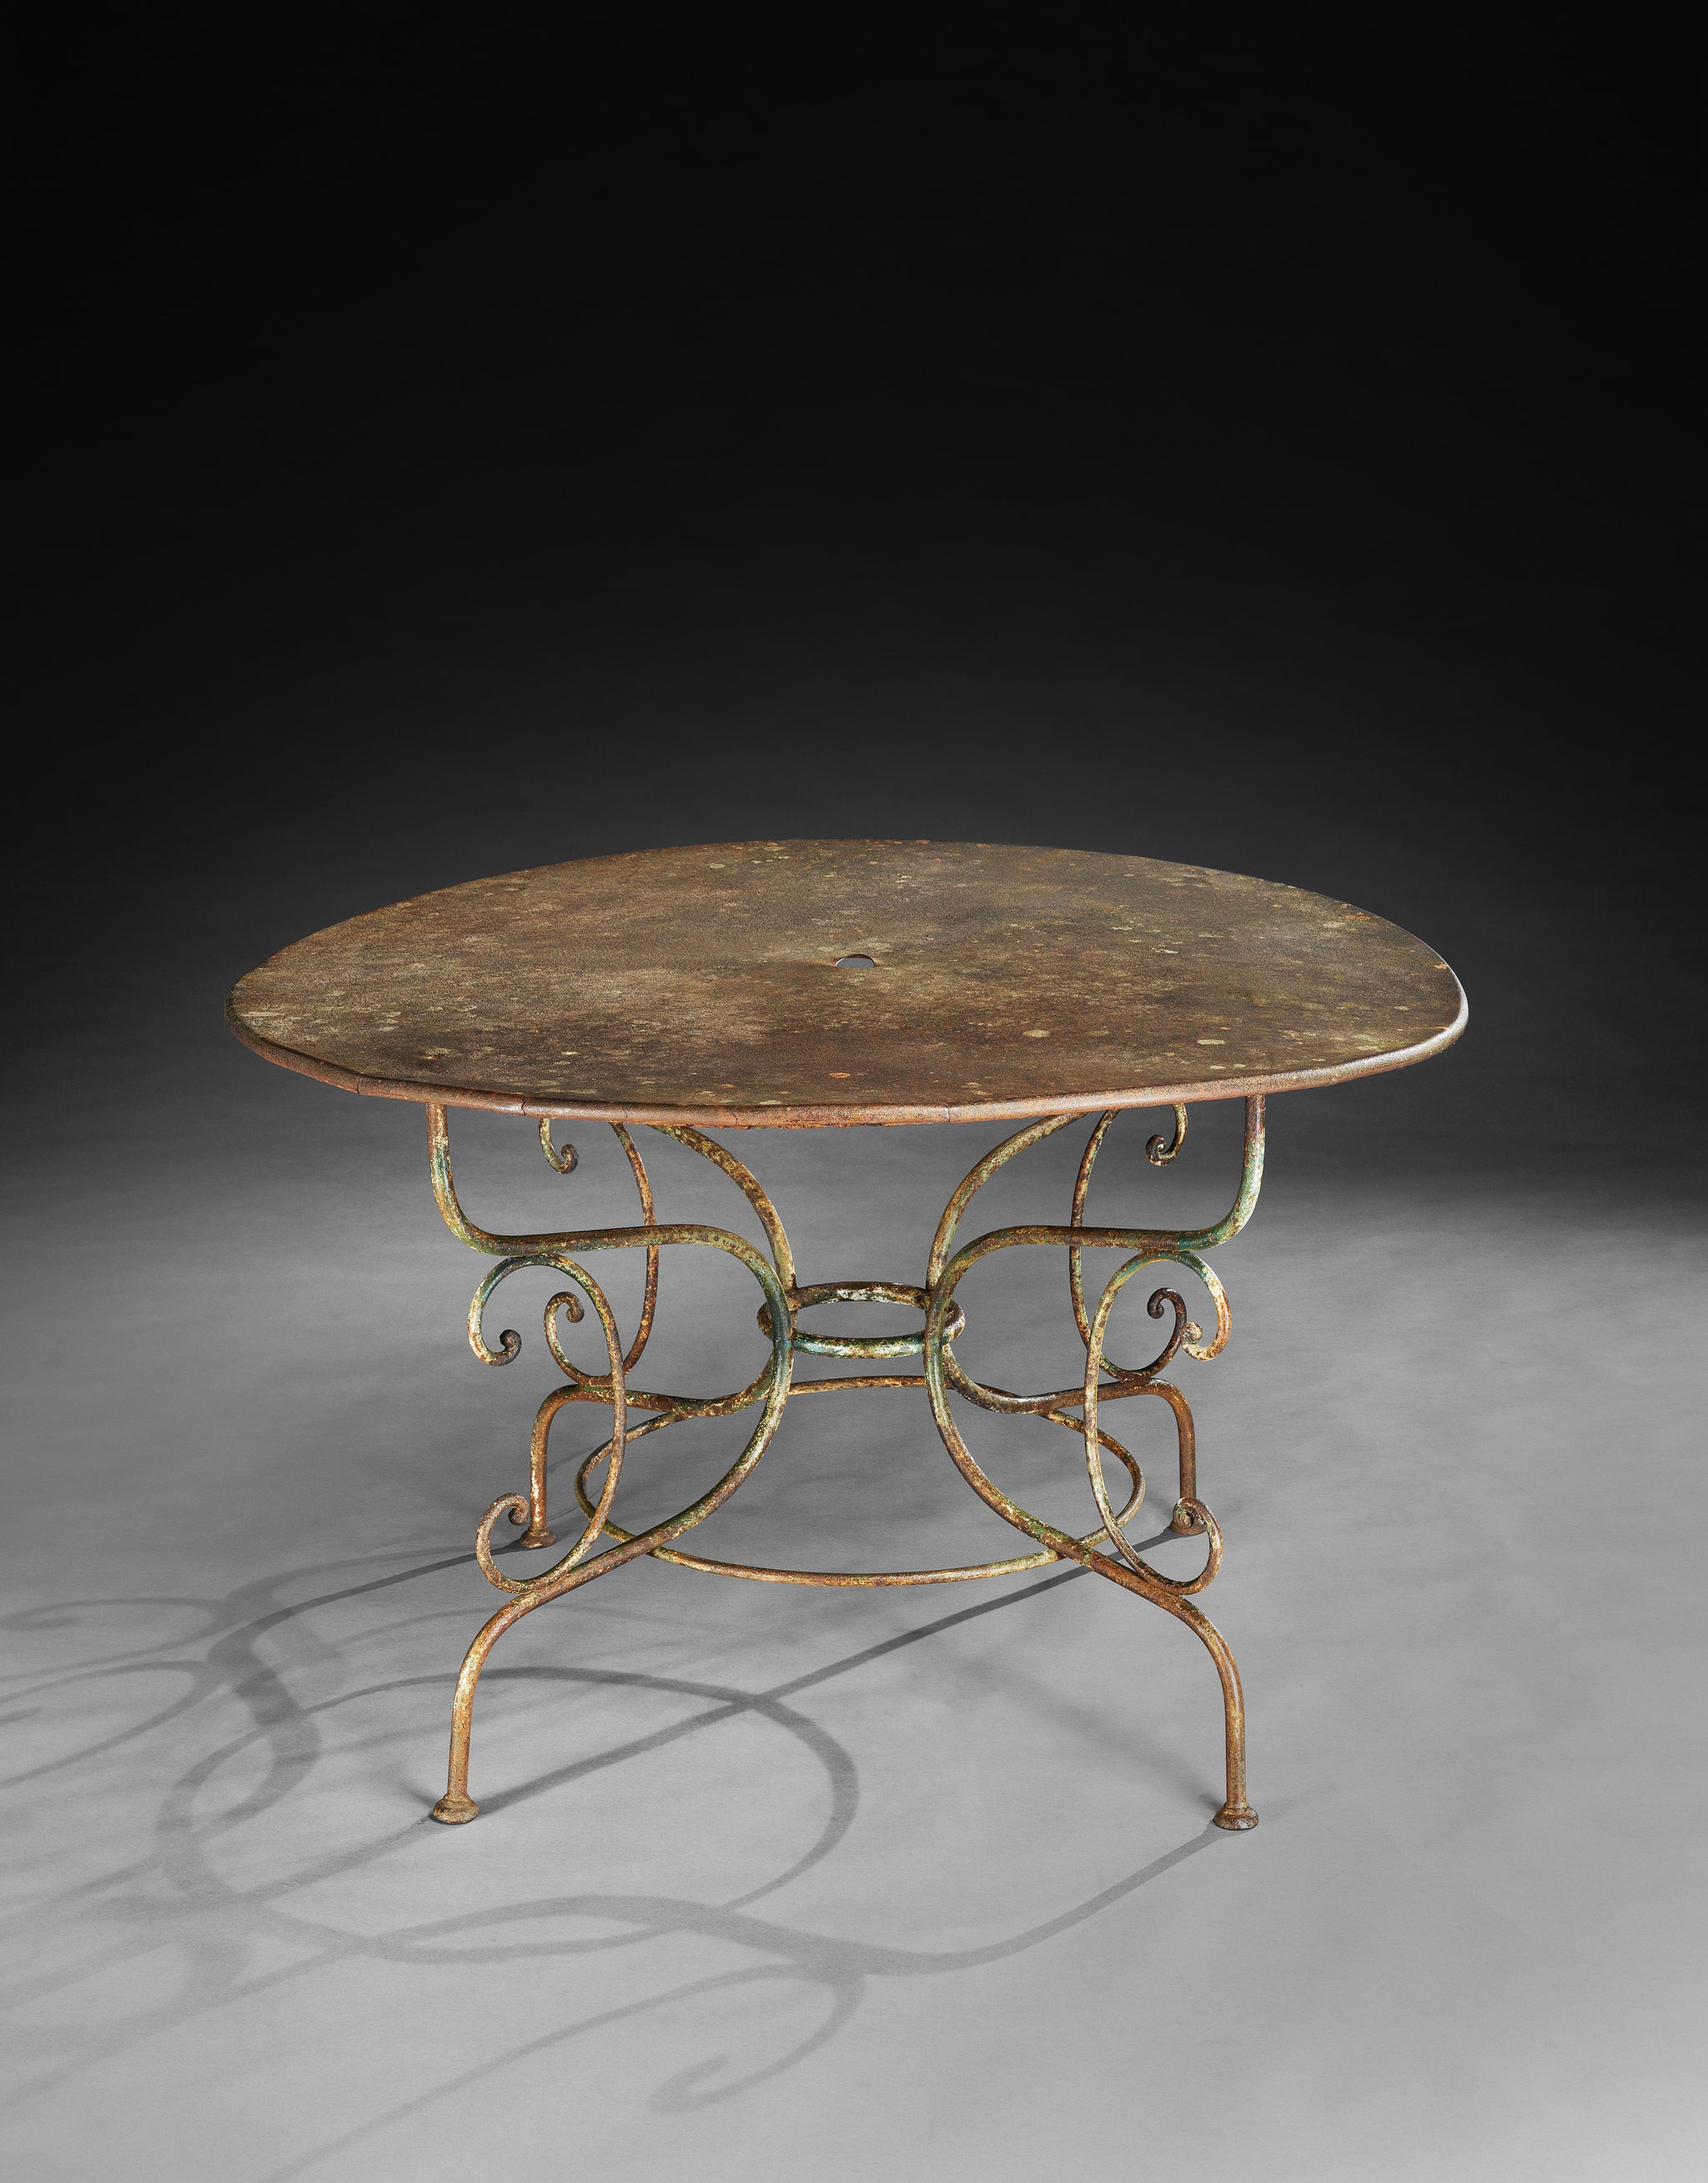 Inviting Large Scale Circular Table